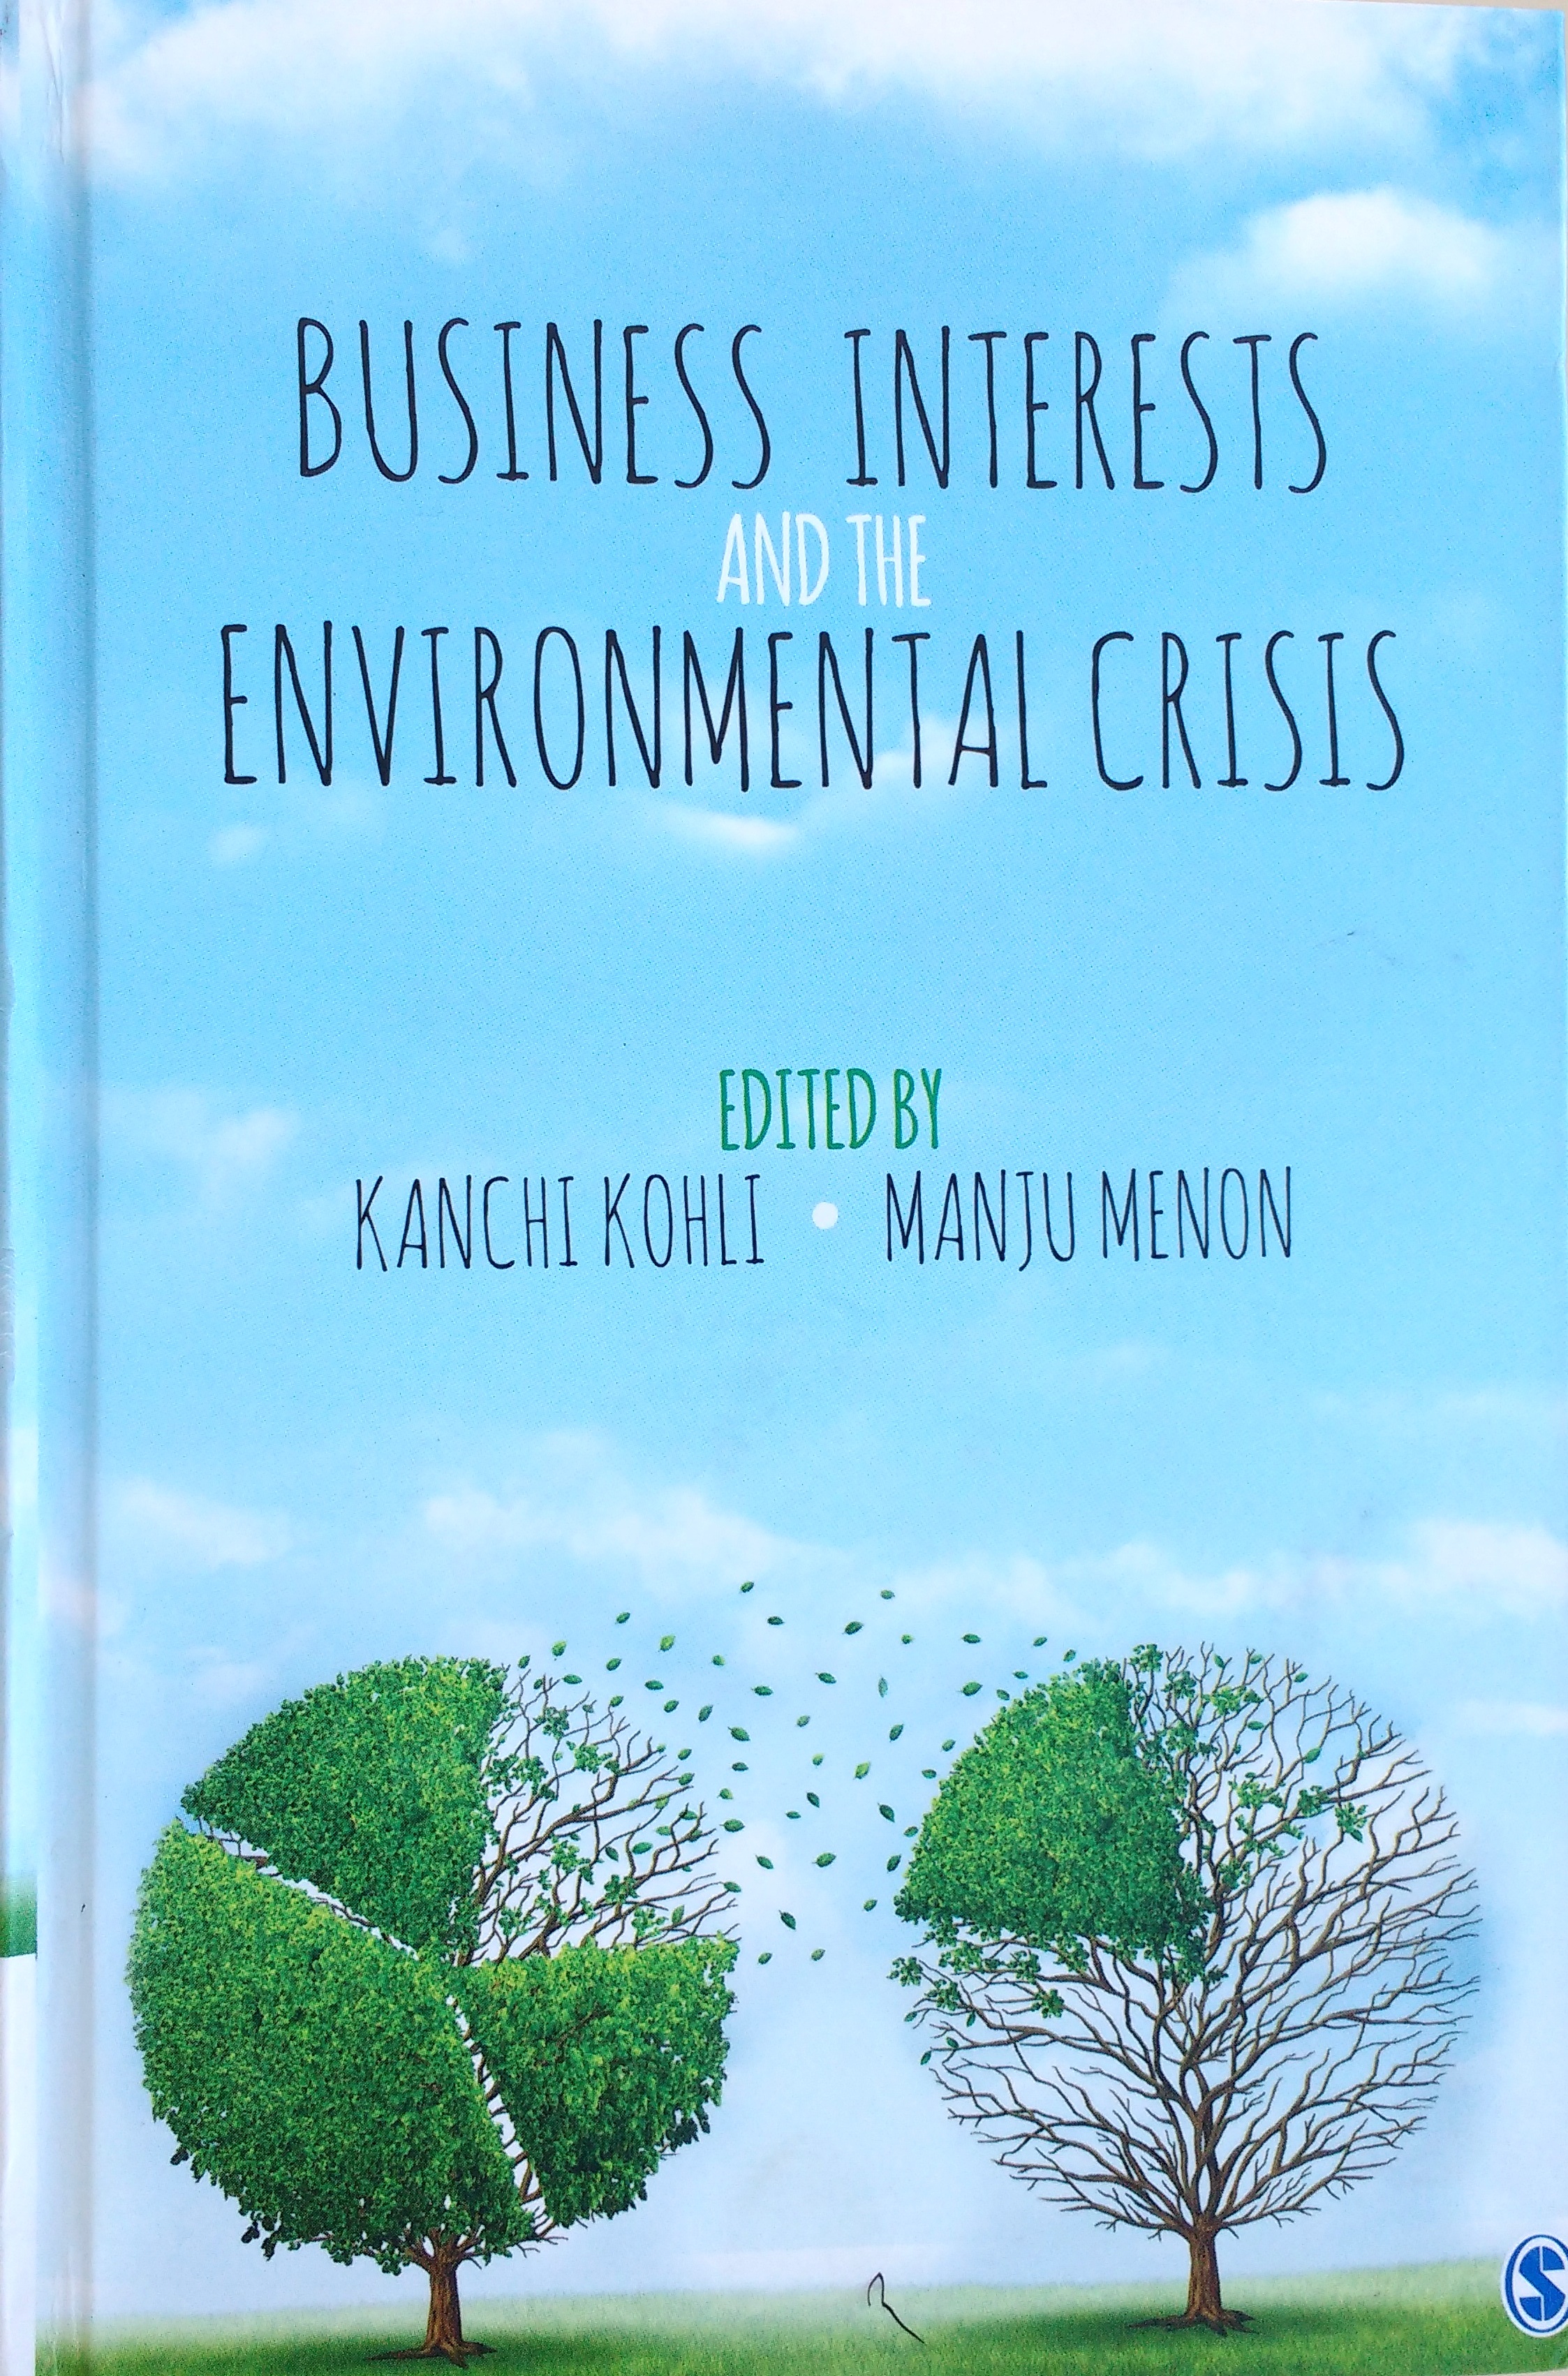 Business interests and the environmental crisis